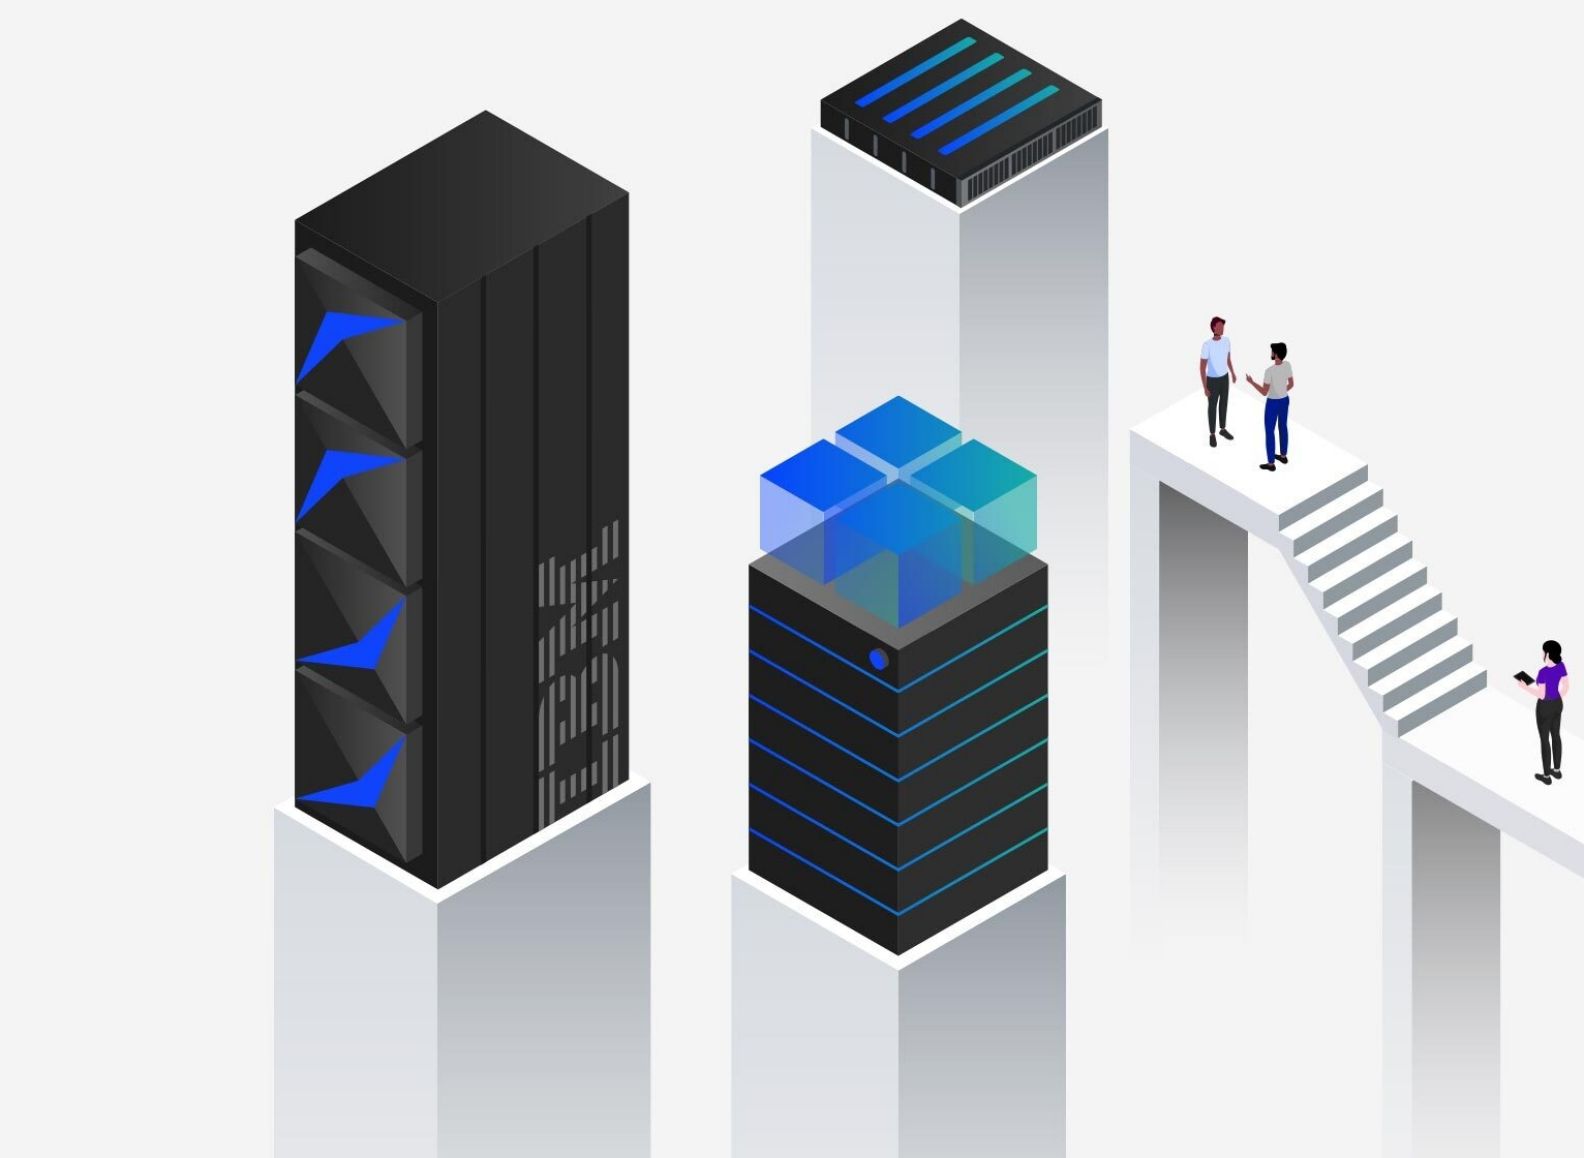 Isometric illustration of a group of people interacting among different types of storage systems